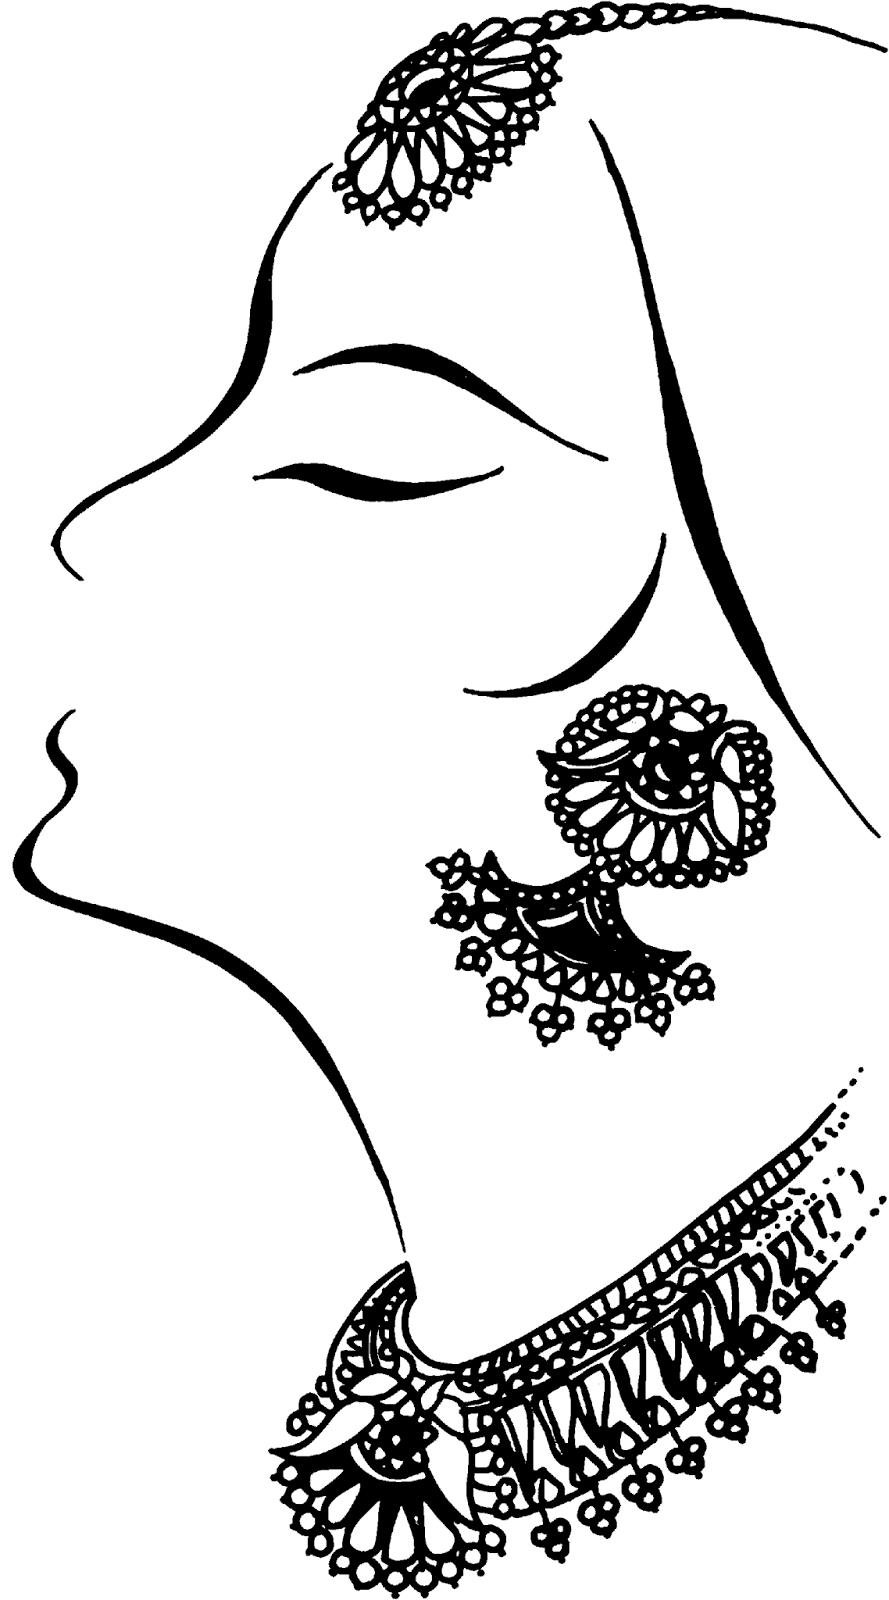 jewelry shopping clipart - photo #44